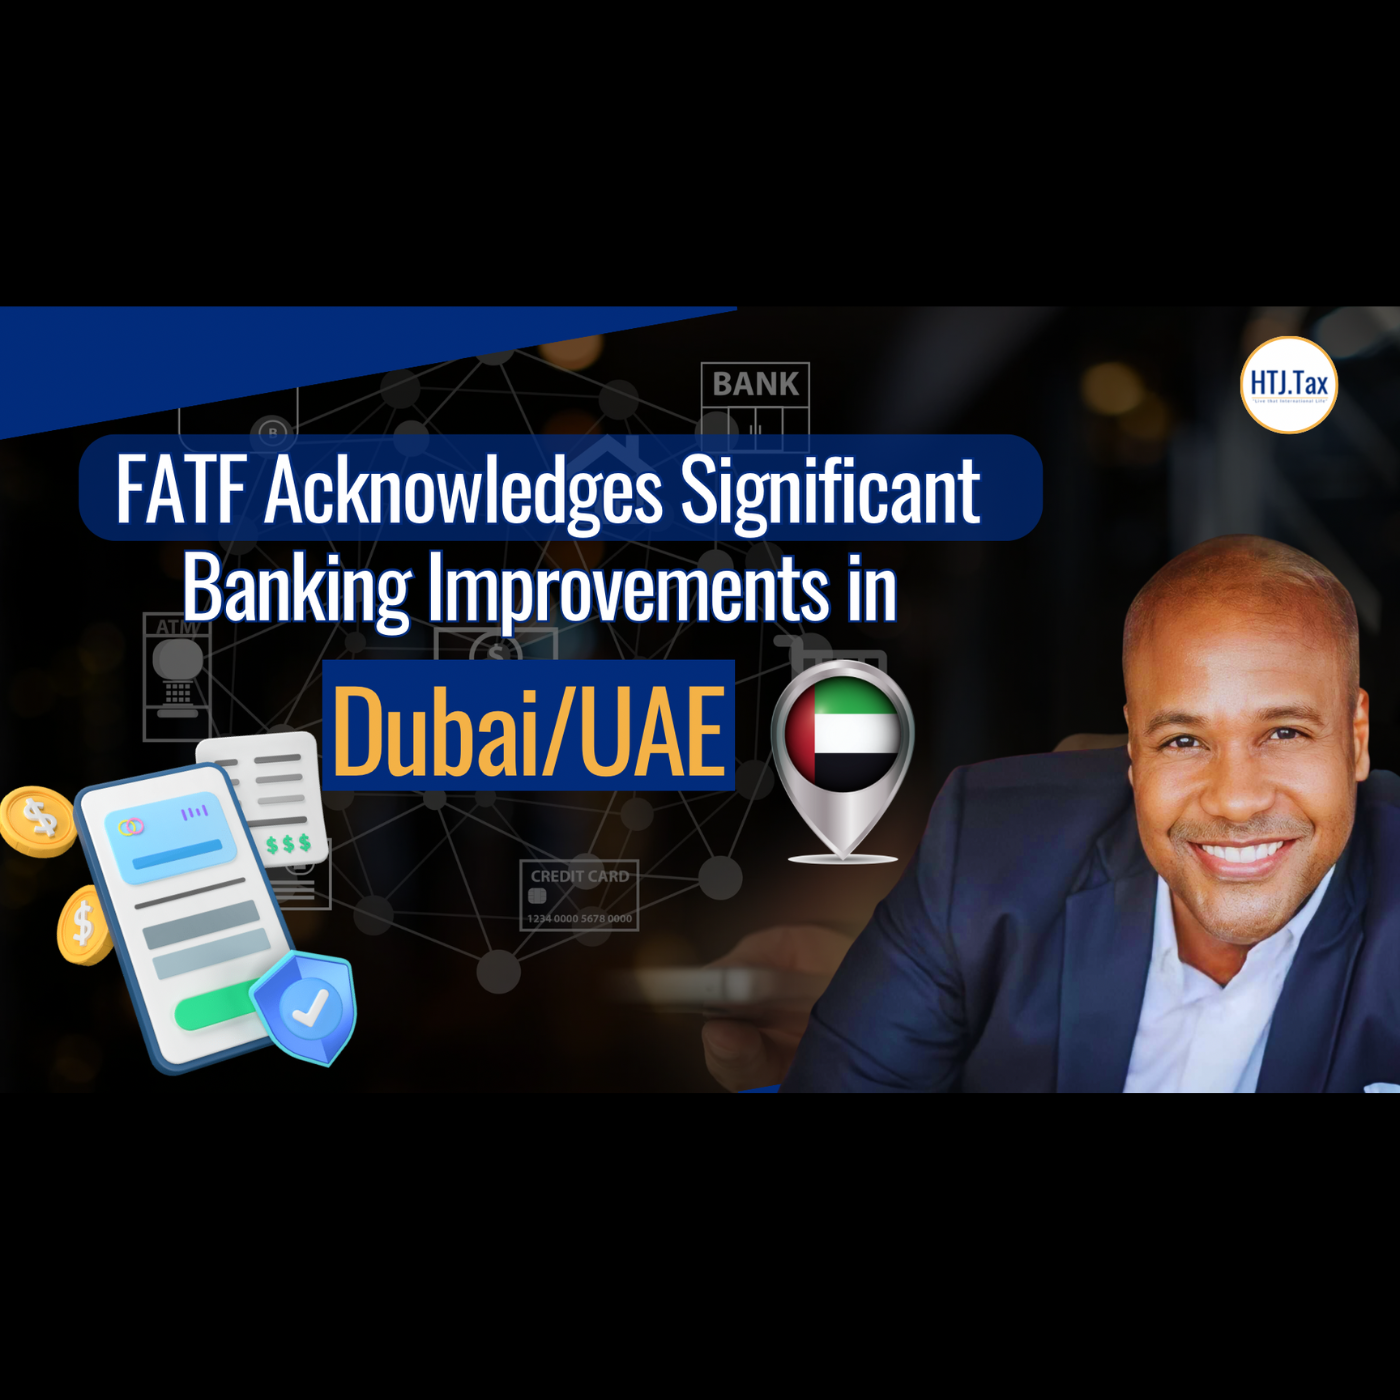 [ Offshore Tax ] FATF Acknowledges Significant Banking Improvements In Dubai/UAE.